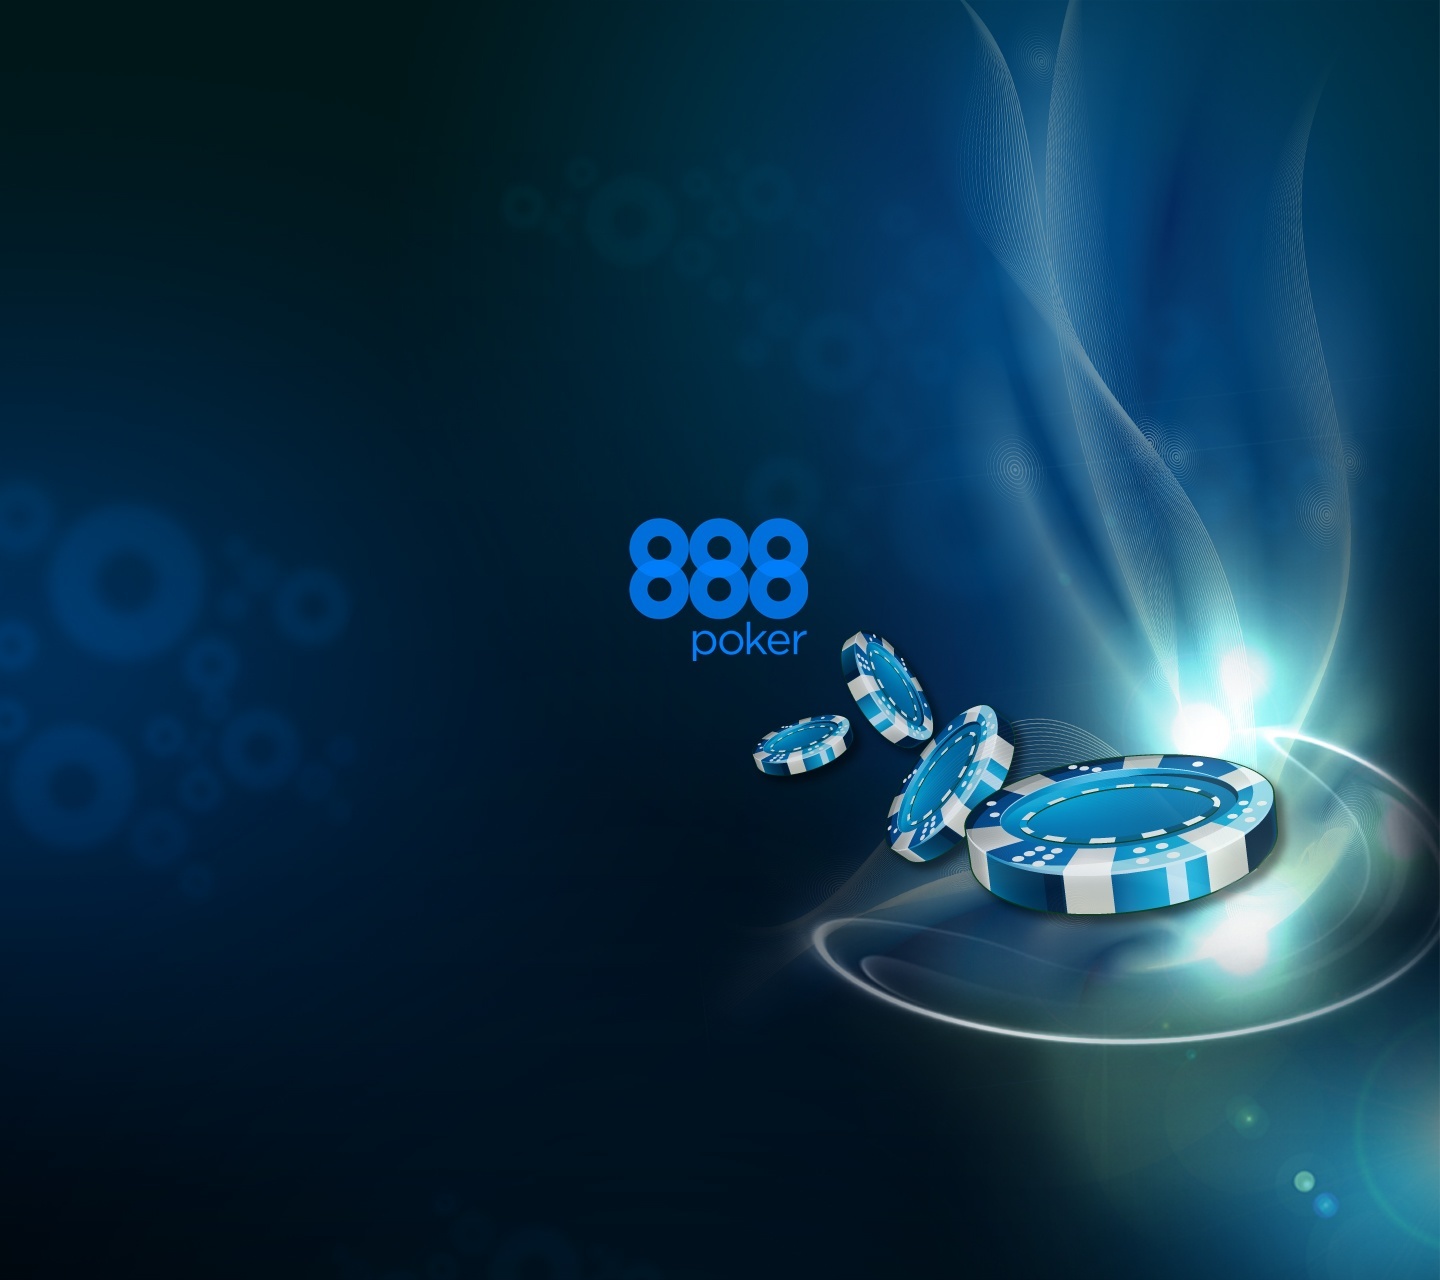 888poker Introduces Tournament Pause Button to Battle Disconnection Issues